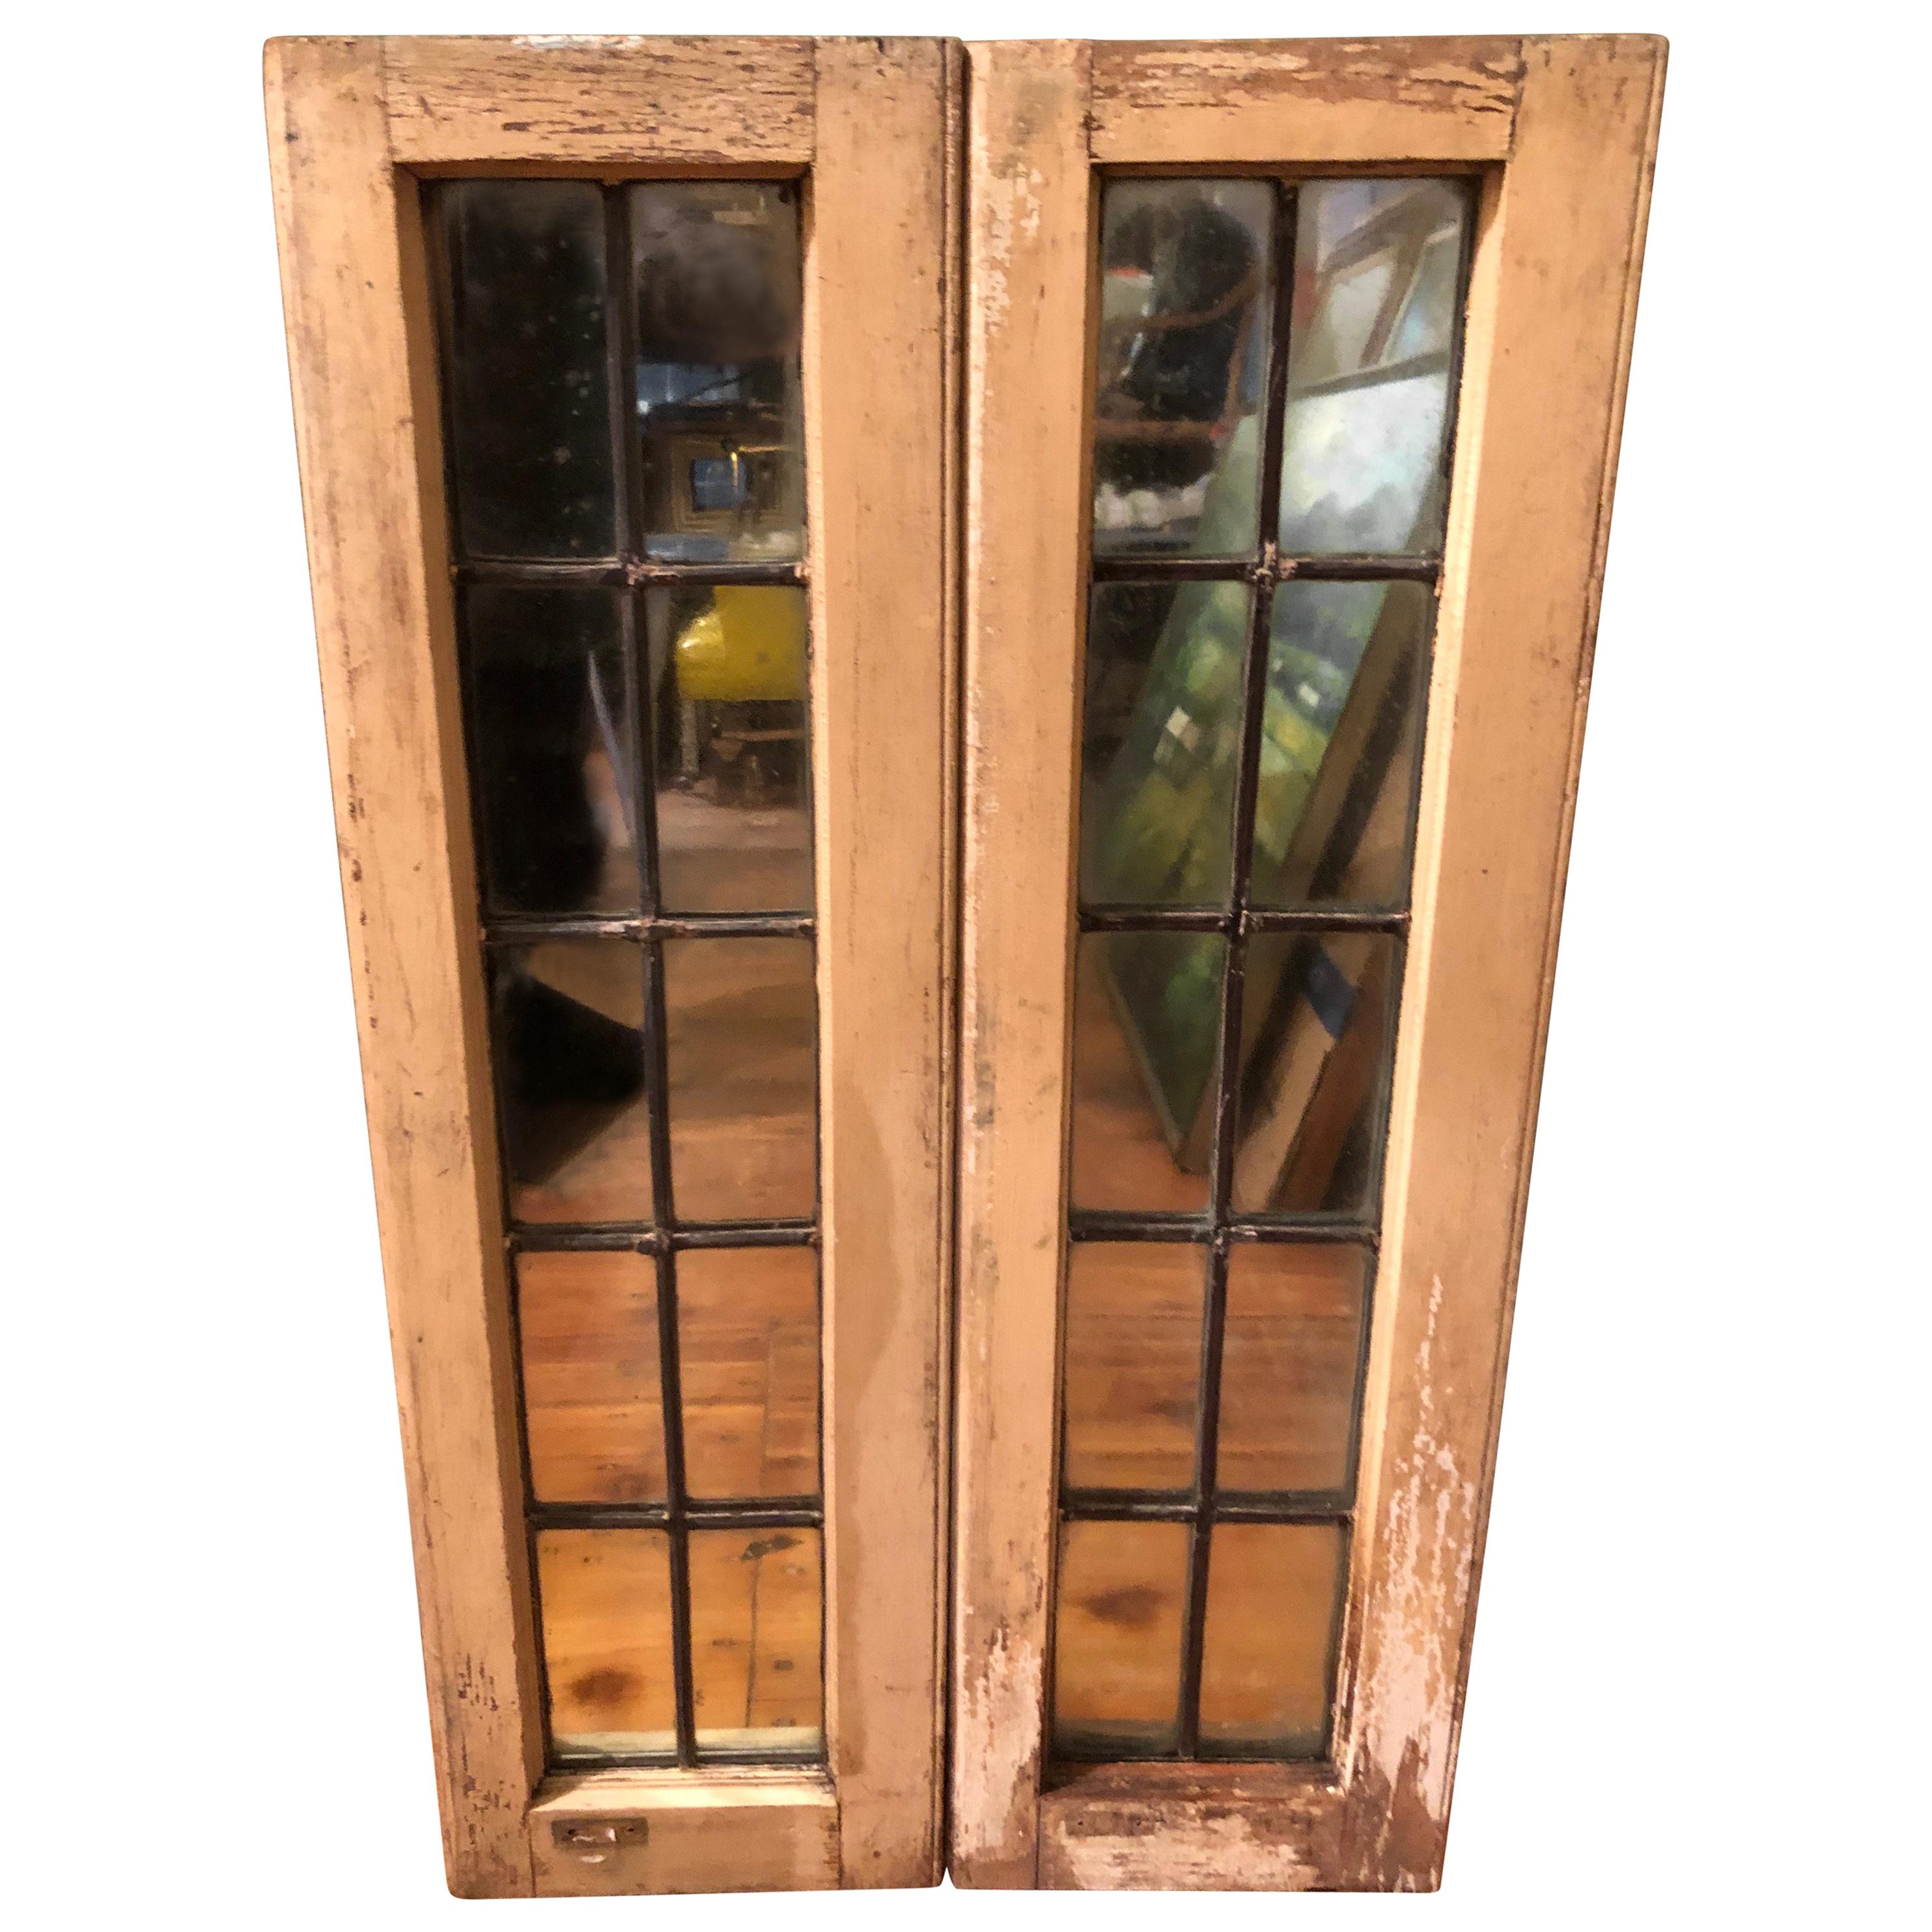 Pair of Shabby Chic leaded glass mirrors. Nice architectural pieces to install in a country home or just hang on the wall to give a room depth. Cream colored chippy paint and leaded grills. Each window is wired to hang vertically. Can be wired to